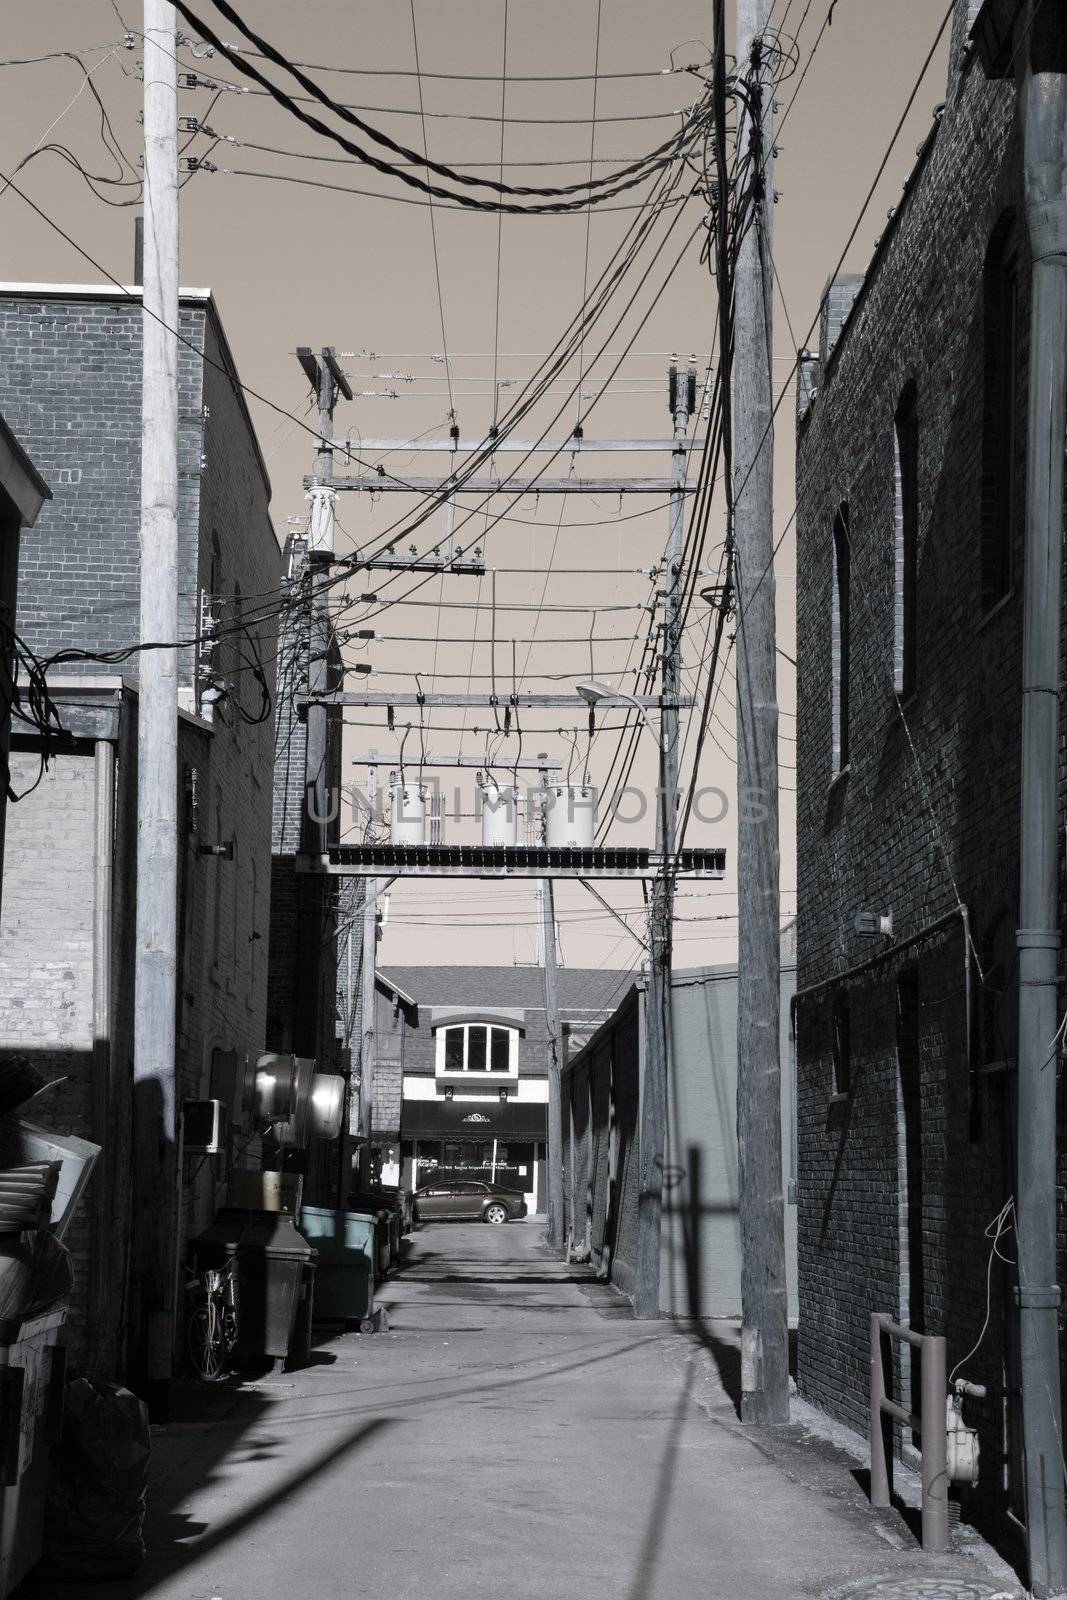 A small town alley somewhere in America shot with muted colors.